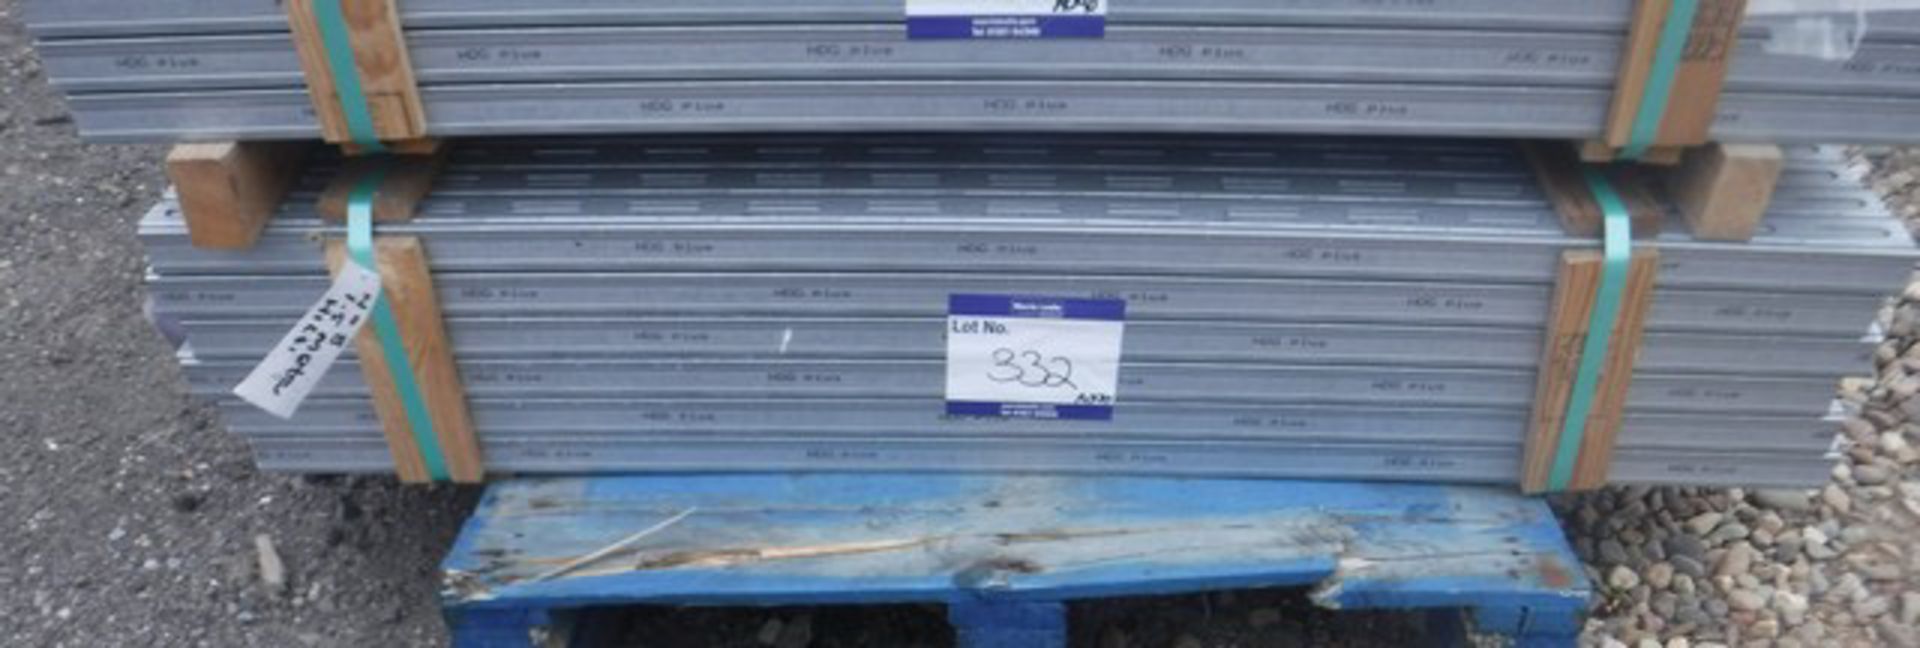 HILTI chanel 1.5m long x 2mm - 108 lengths. New, used in construction for shelving.